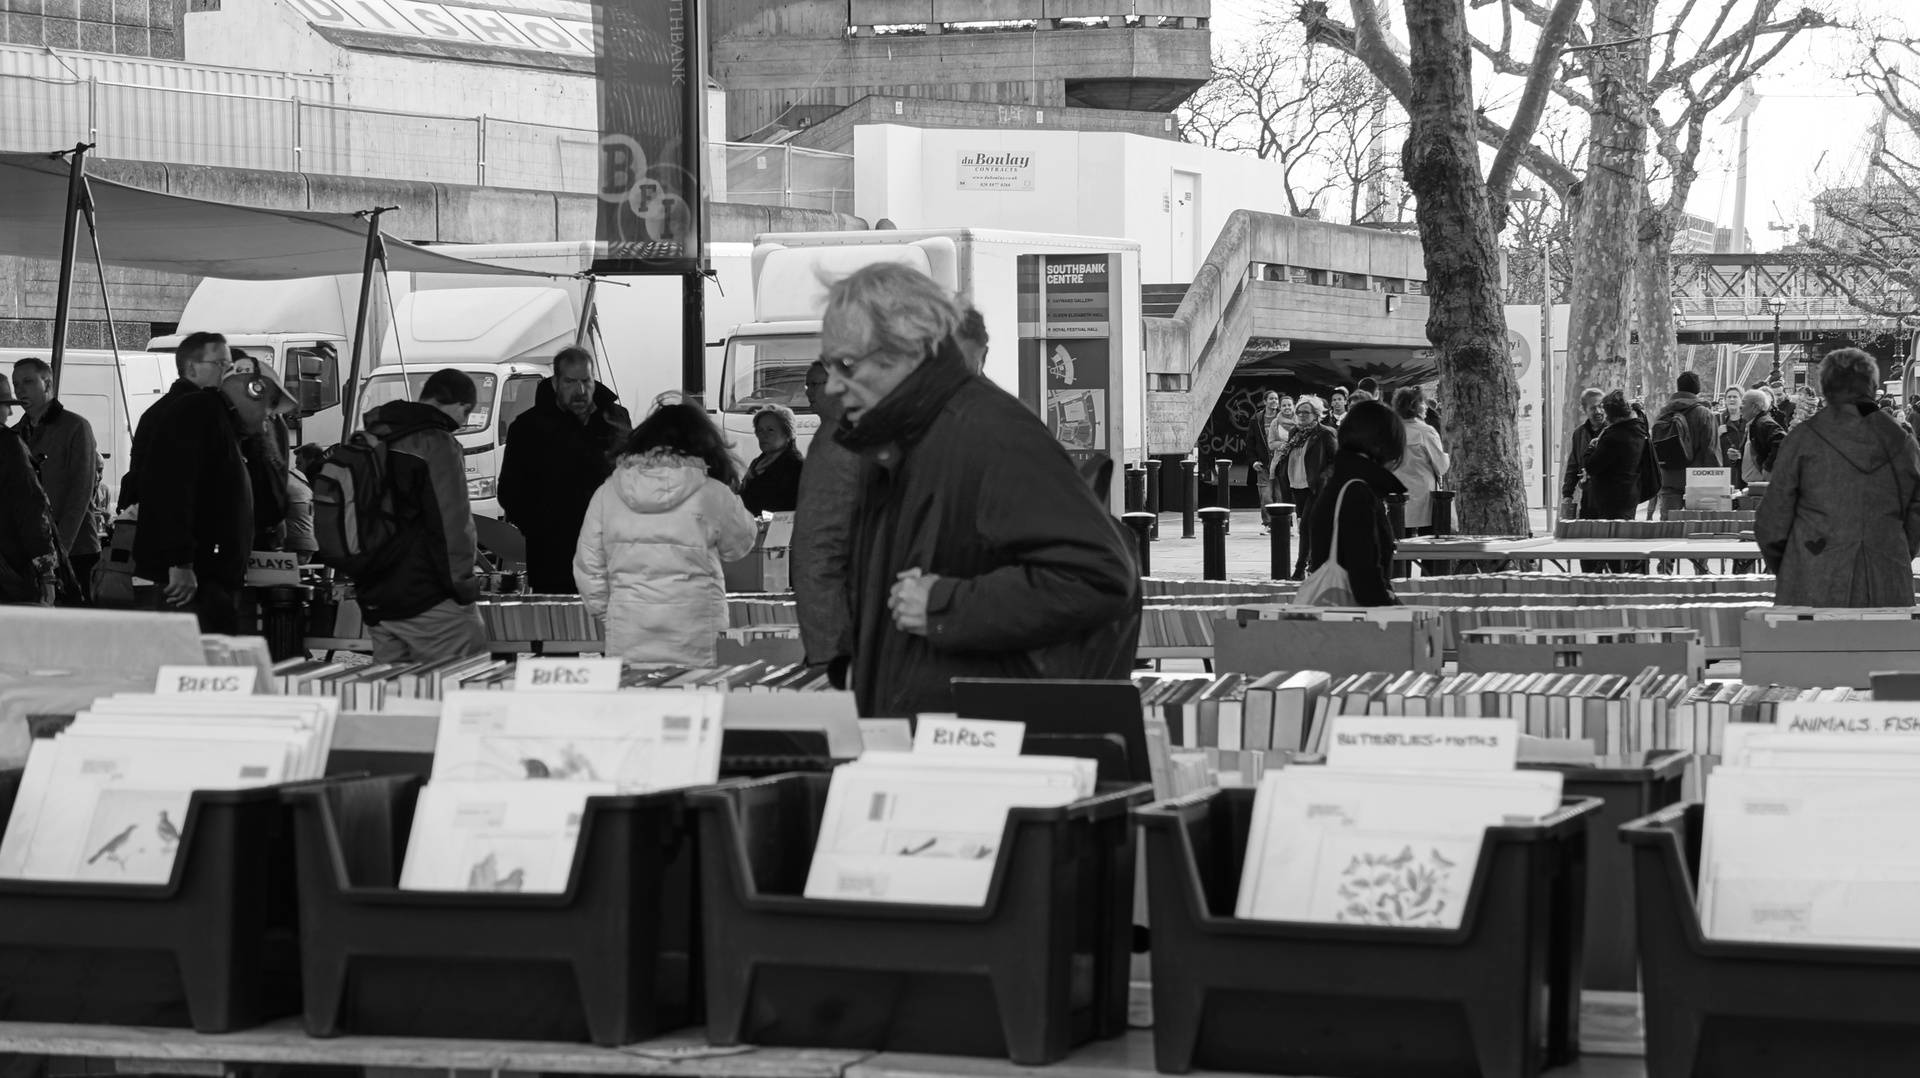 South Bank book stall, London